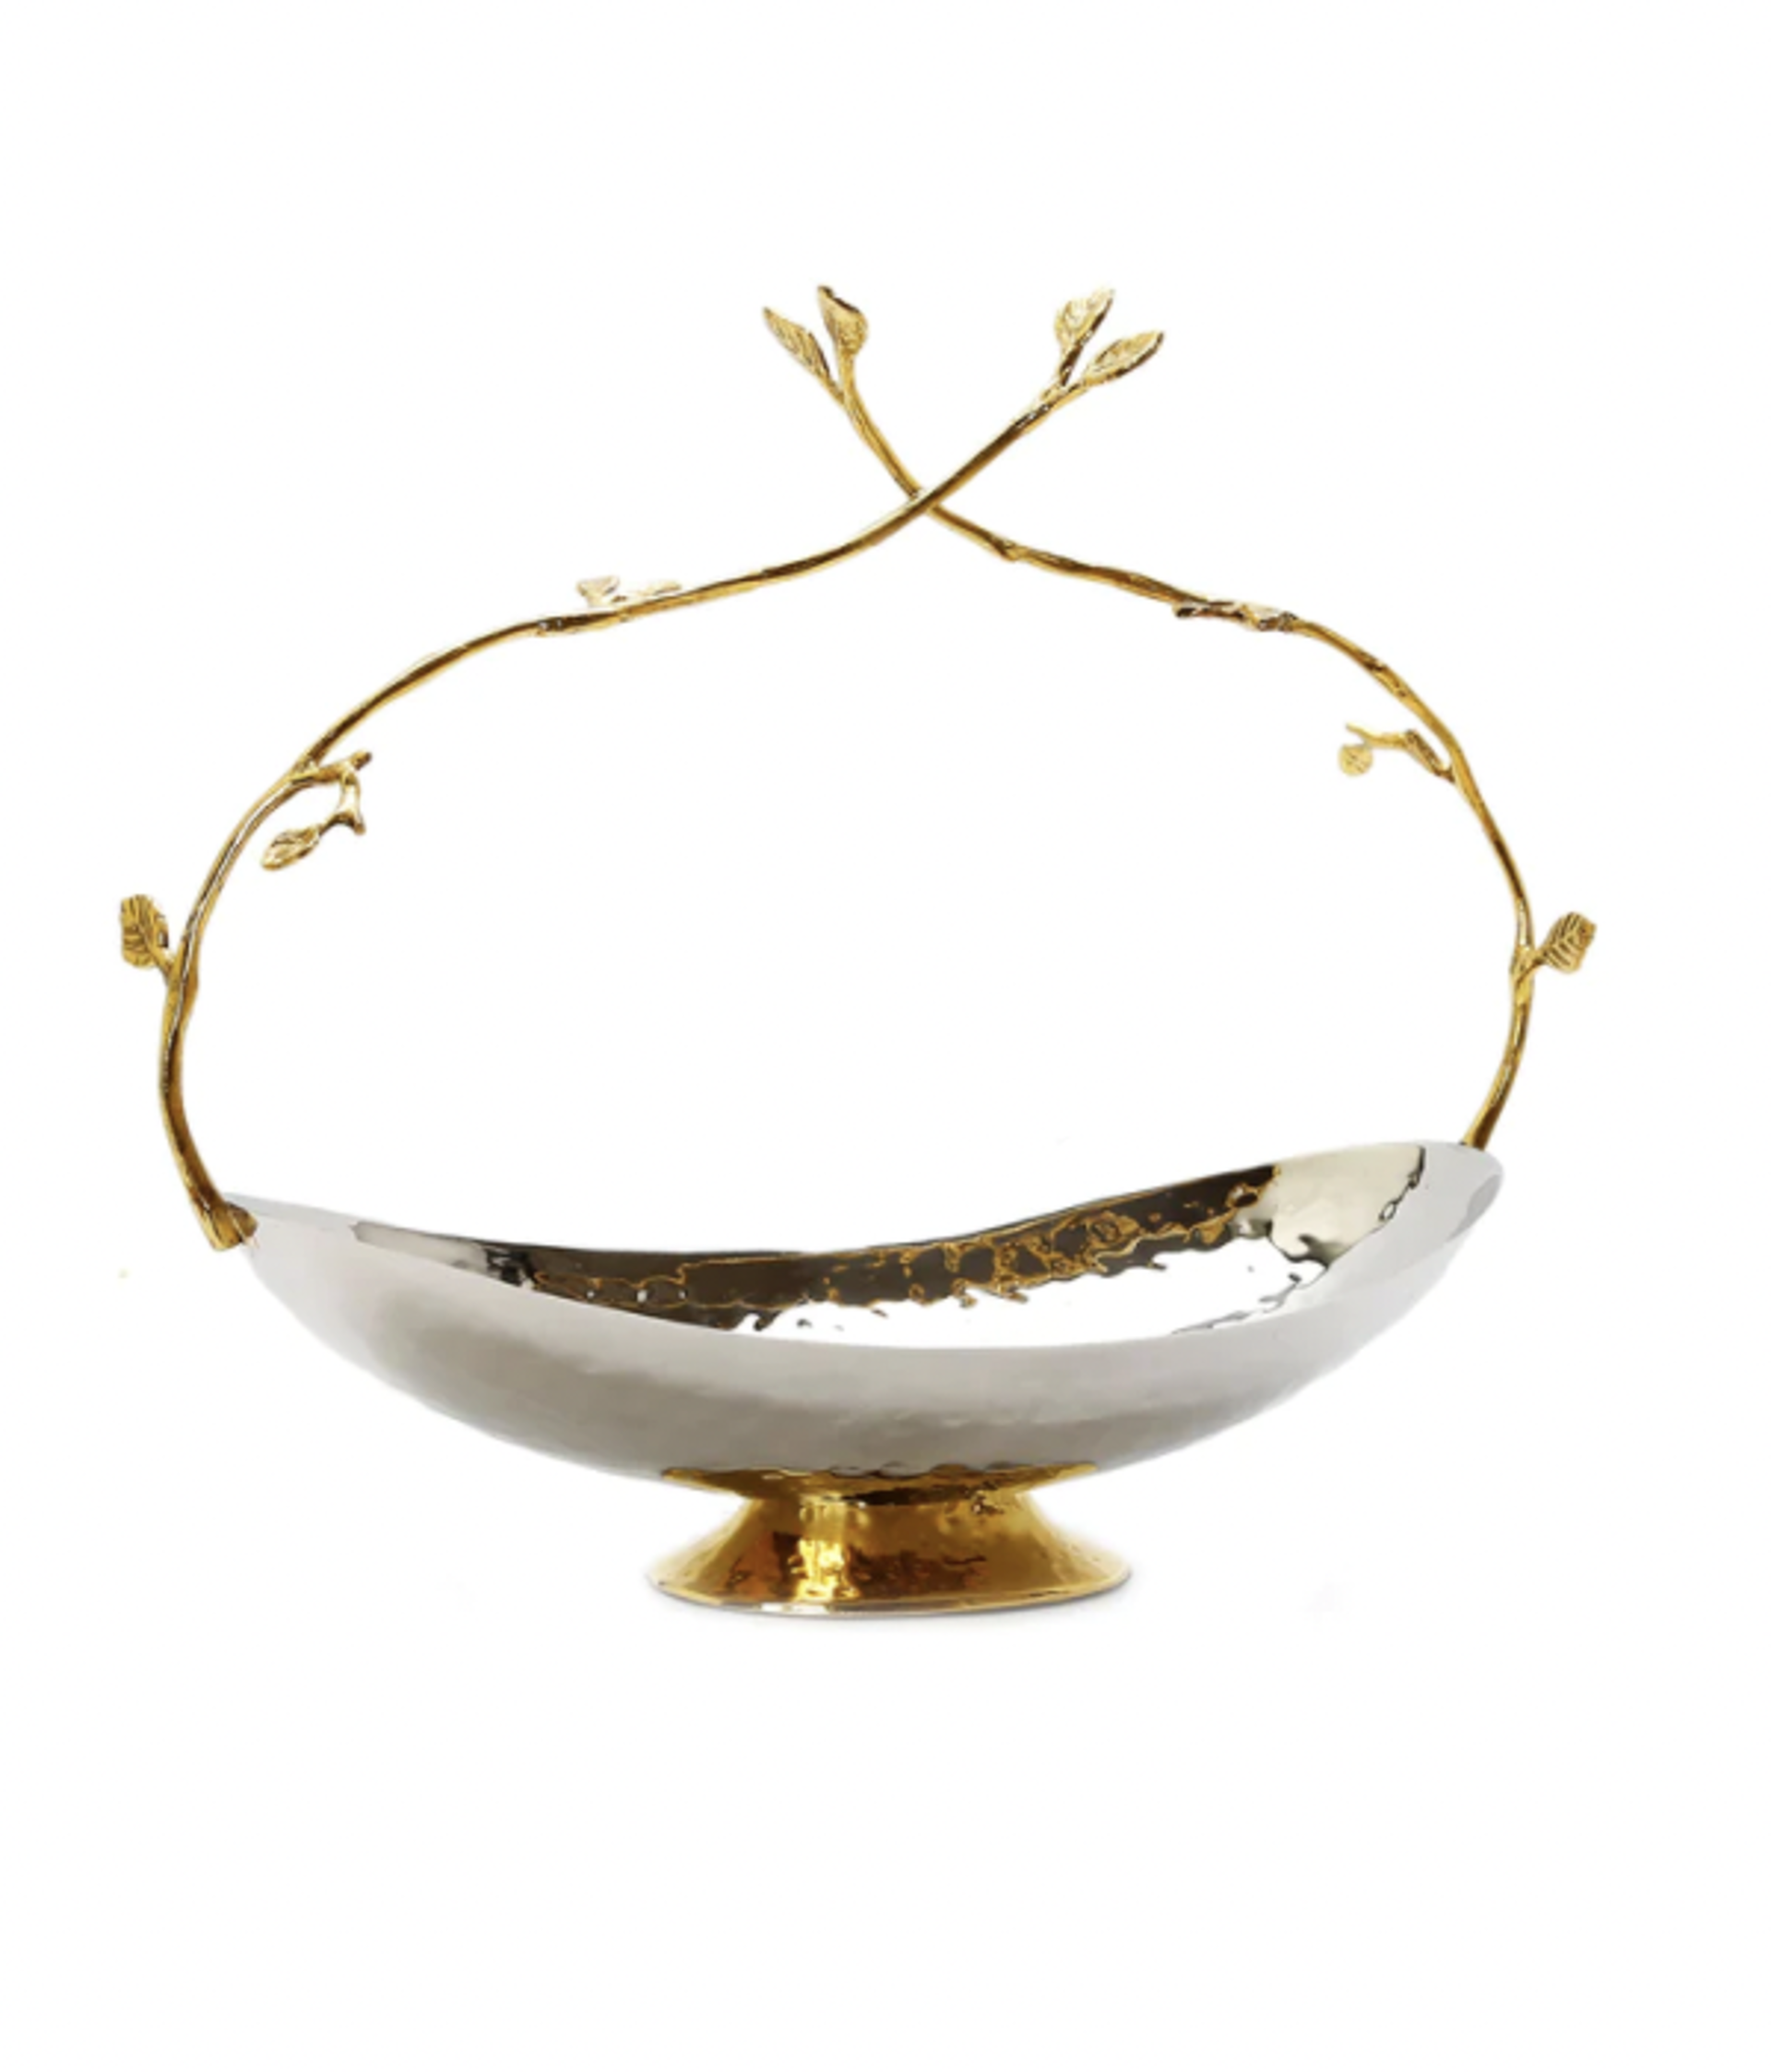 Basket with Gold Twig Handle by Argent